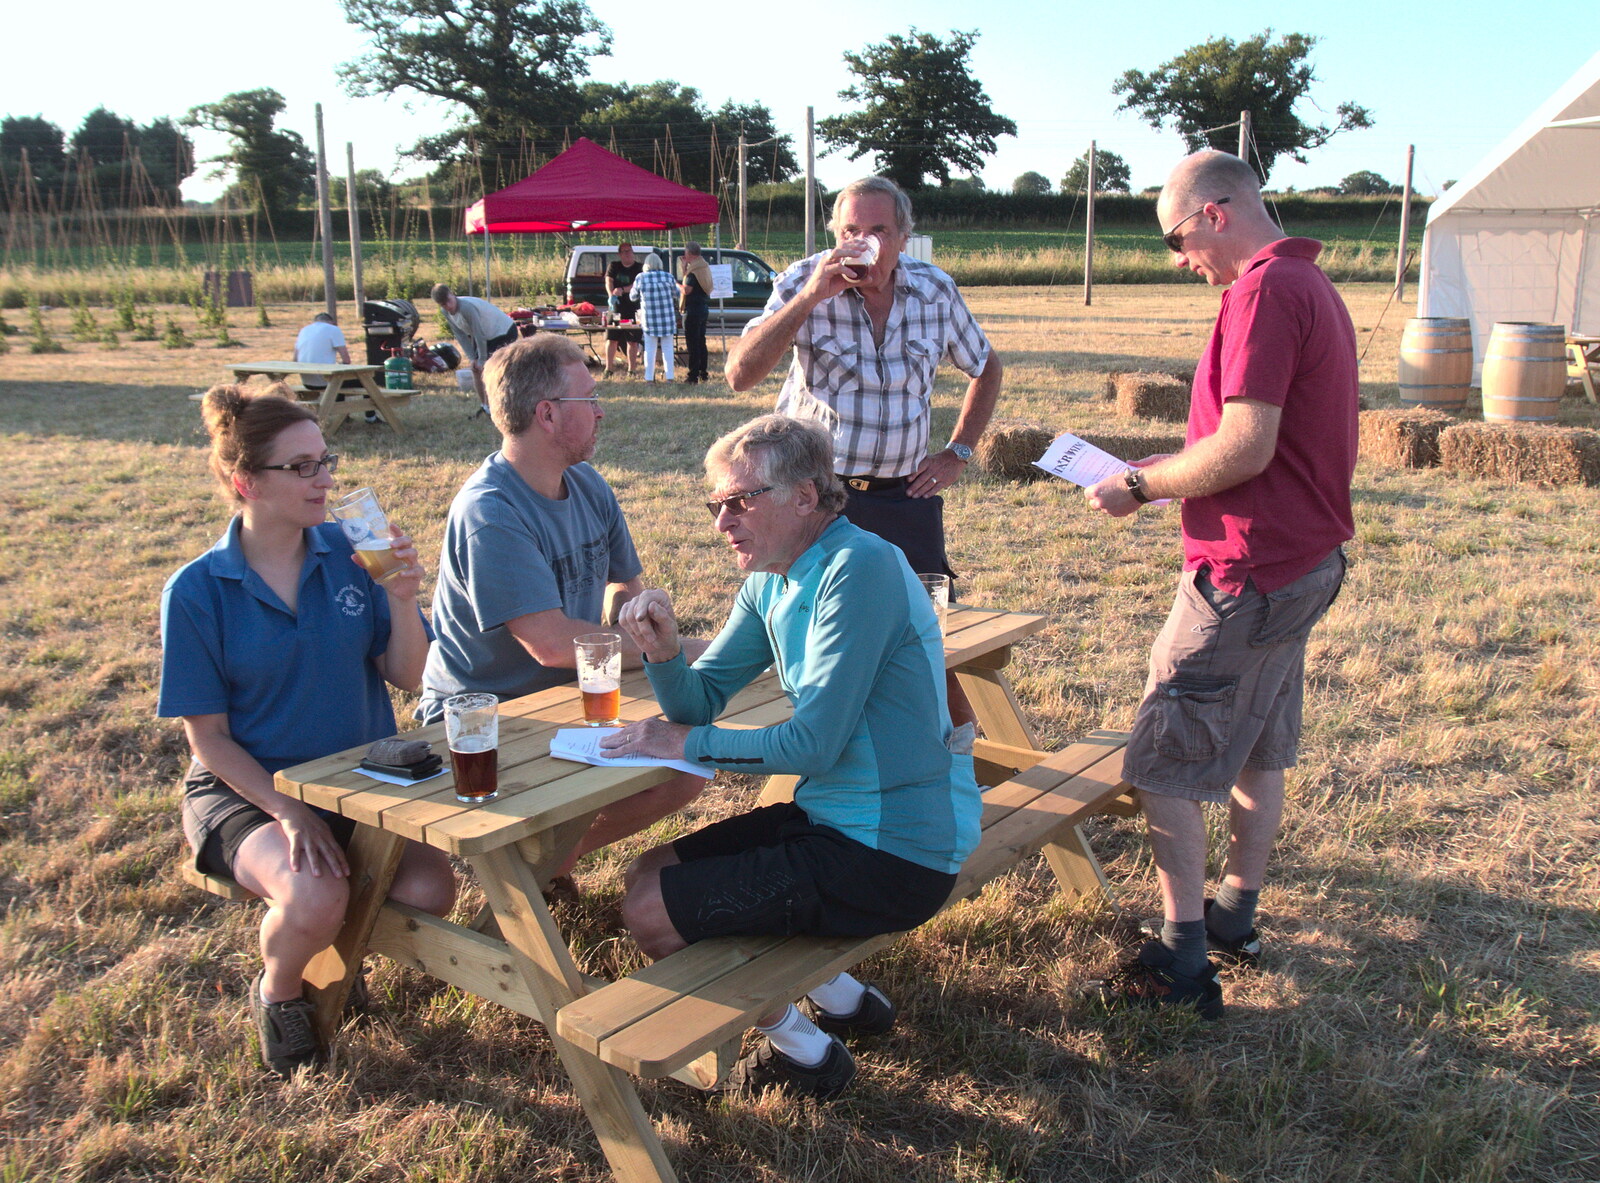 Drinking beer in the evening sun from The BSCC Rides to Star Wing Beer Festival, Redgrave, Suffolk - 12th July 2018